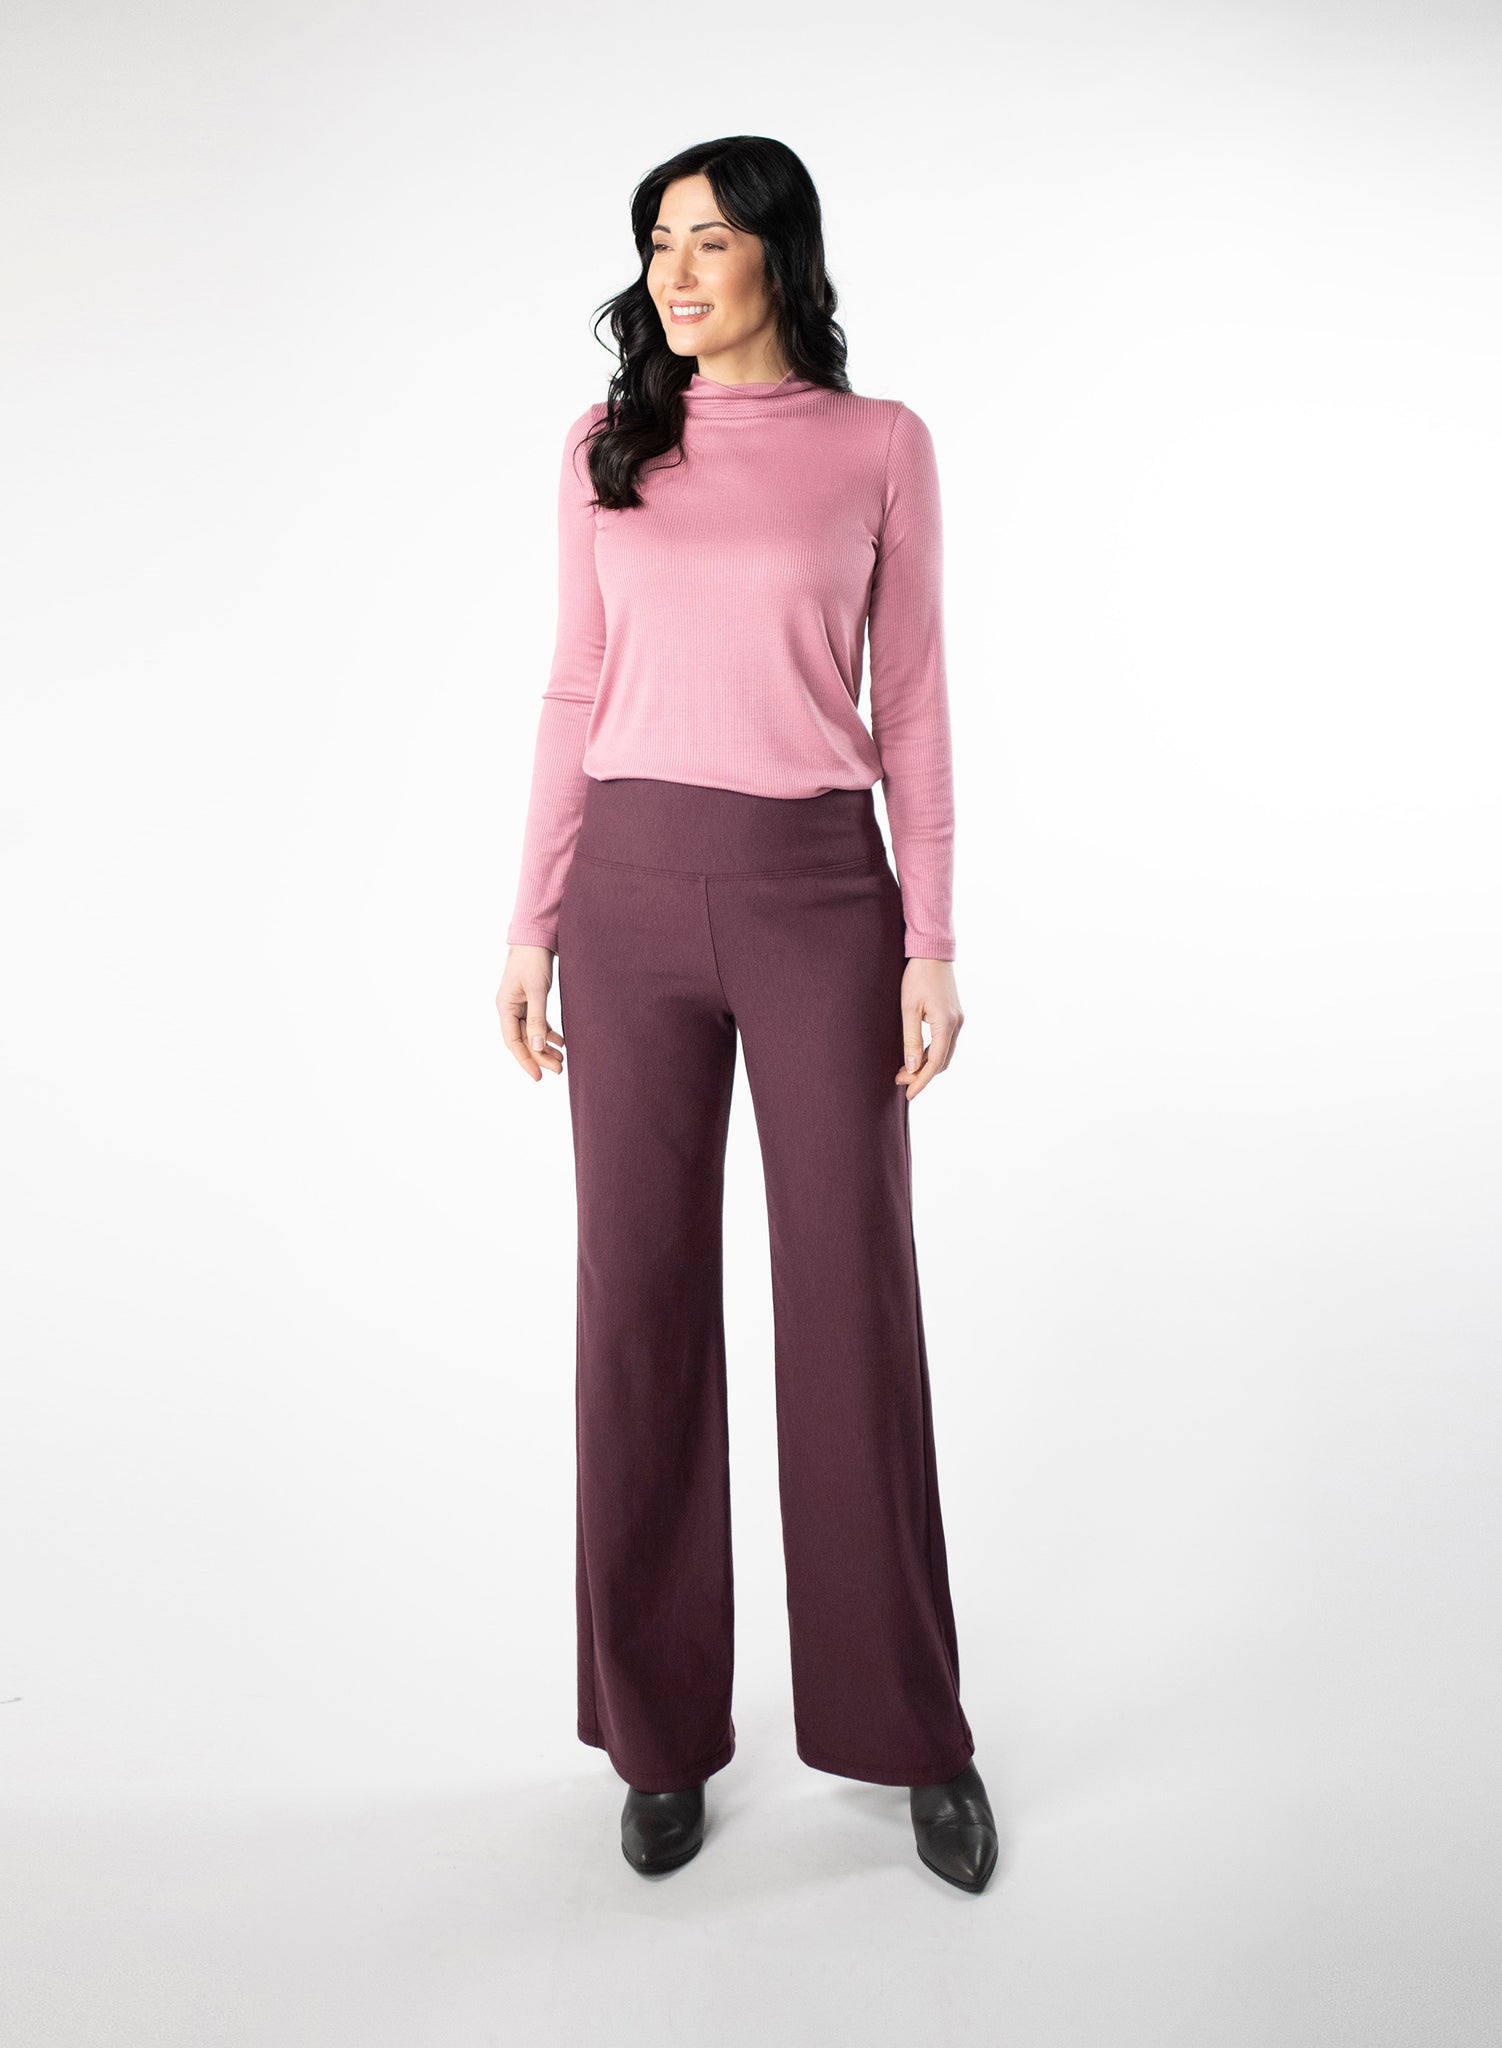 Same-day delivery] [Self-made] 155 cm Cantuz Fleece-Lined Wide Long Pants -  4 Colors [Additional length] - Henique